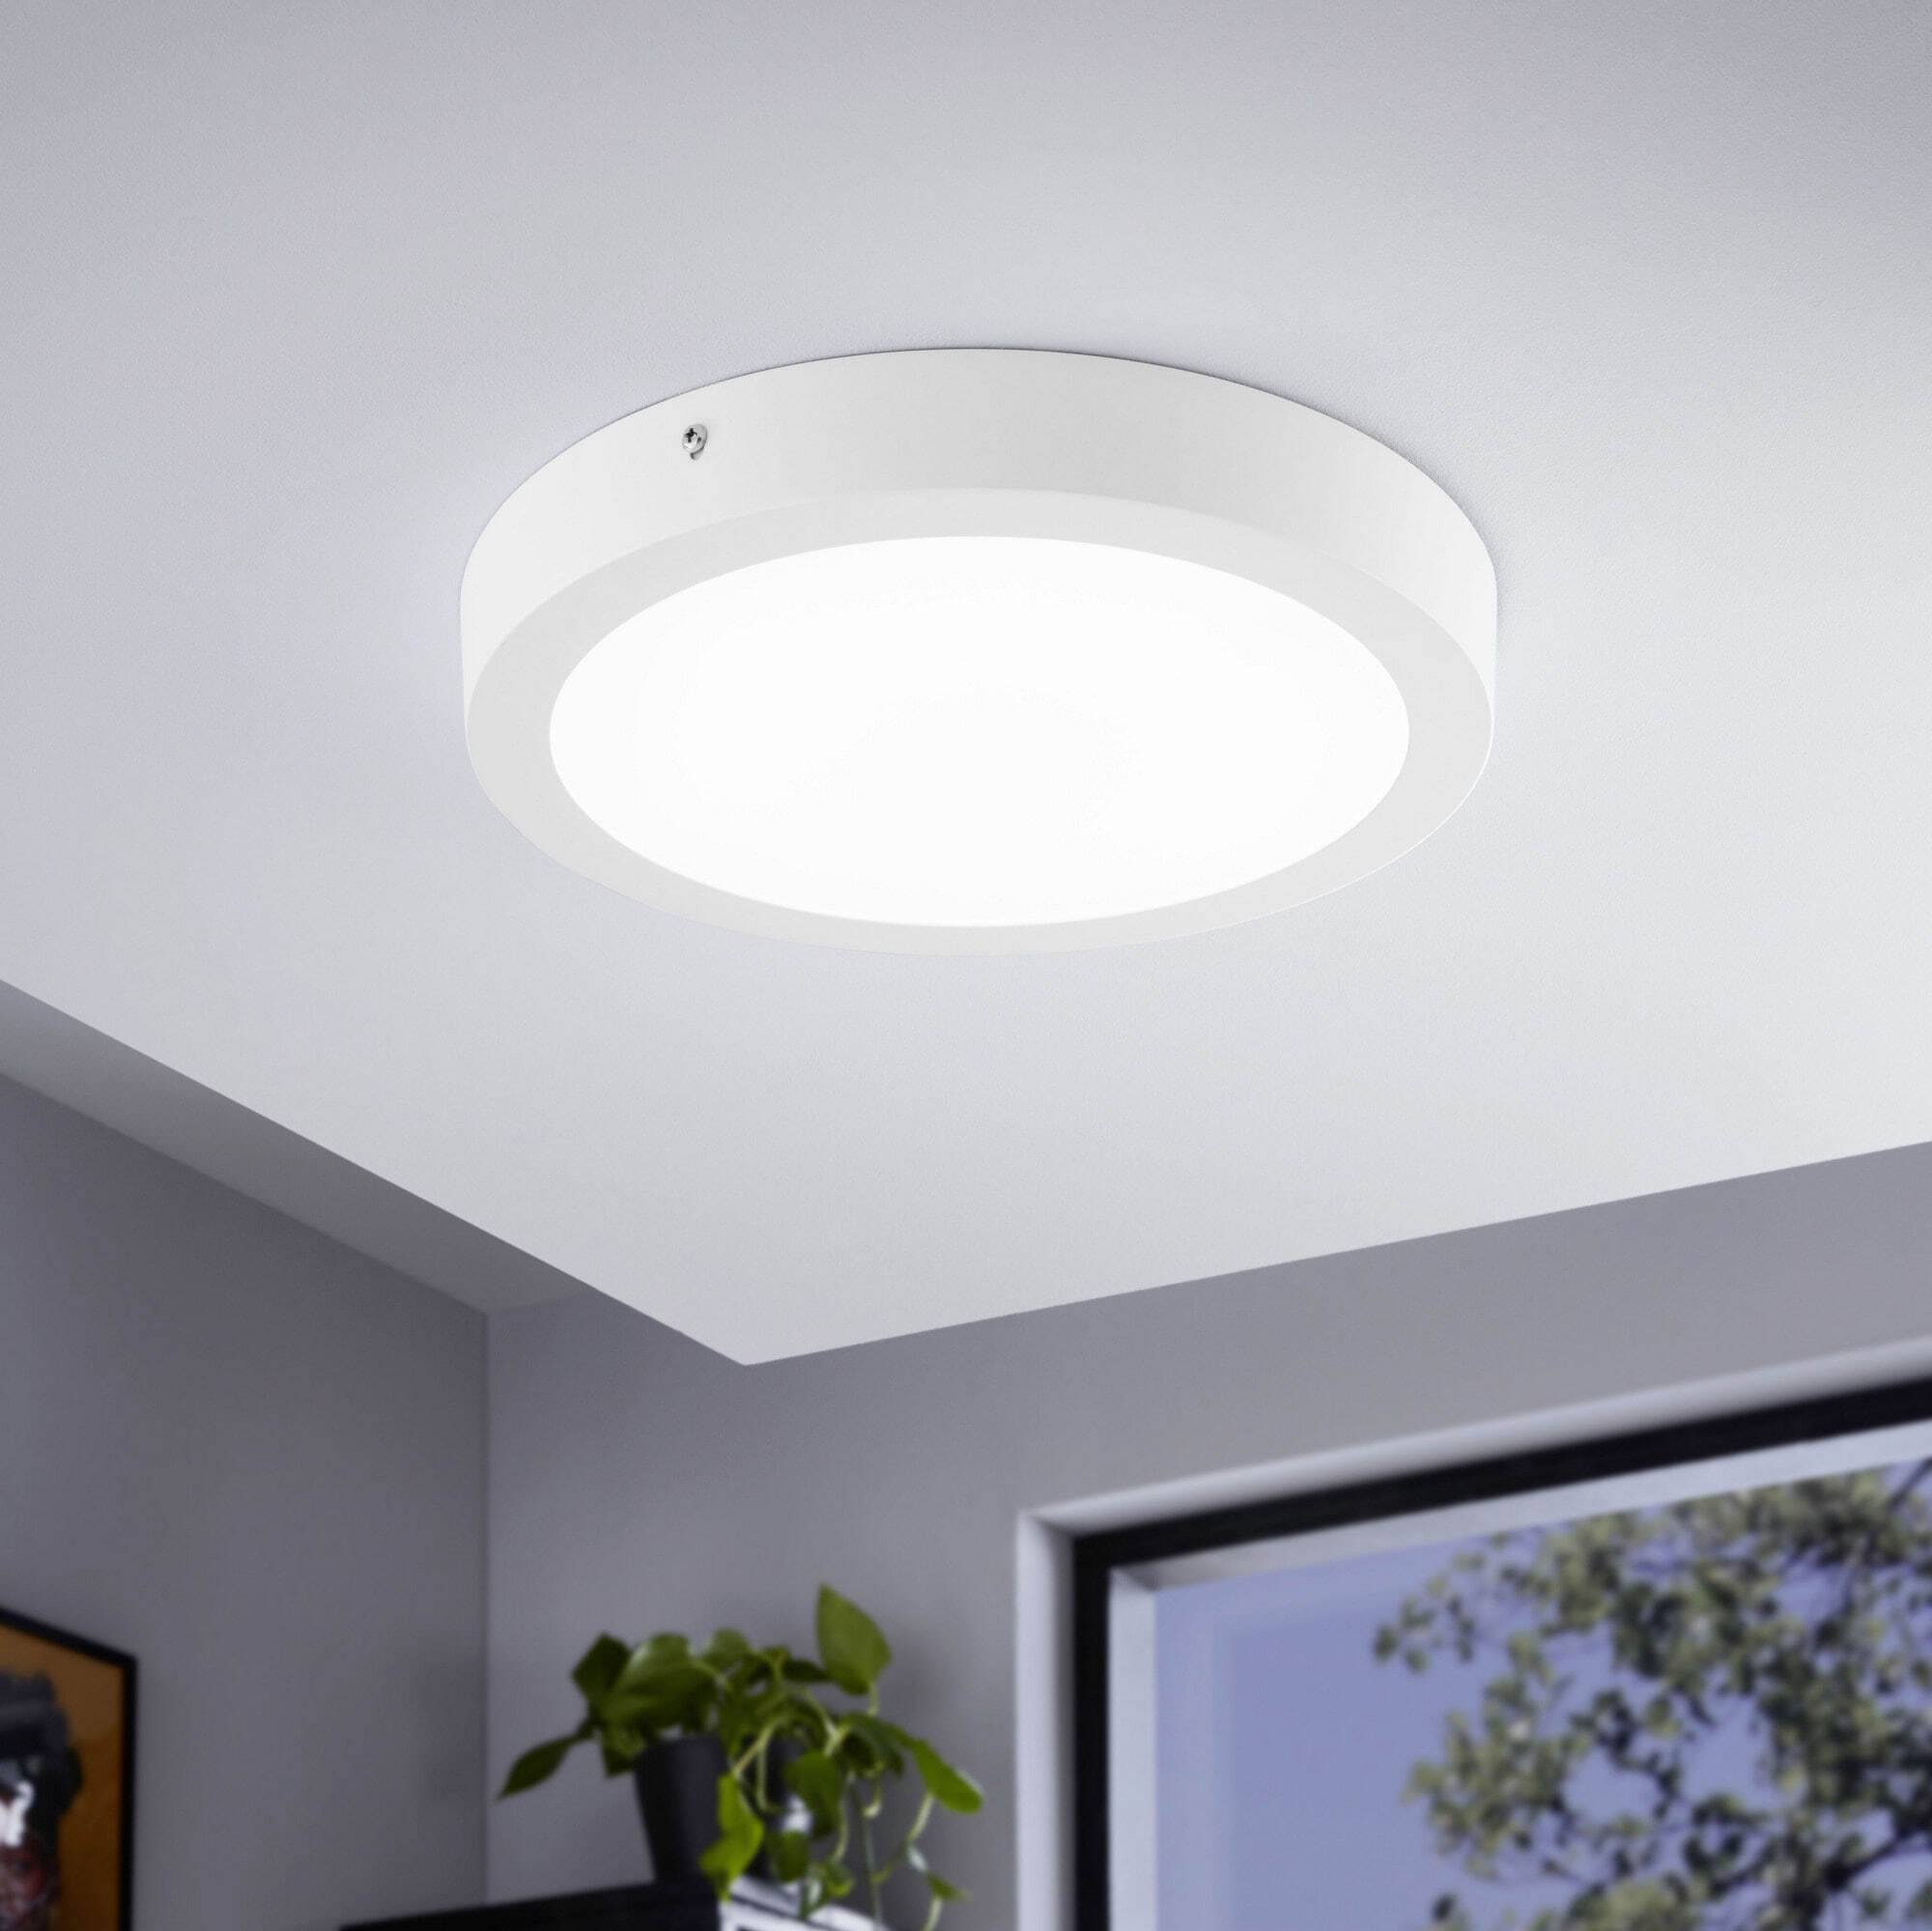 65,95 € Free Shipping | Indoor ceiling light Eglo Fueva C 21W 2700K Very warm light. Ø 30 cm. Metal casting and plastic. White Color